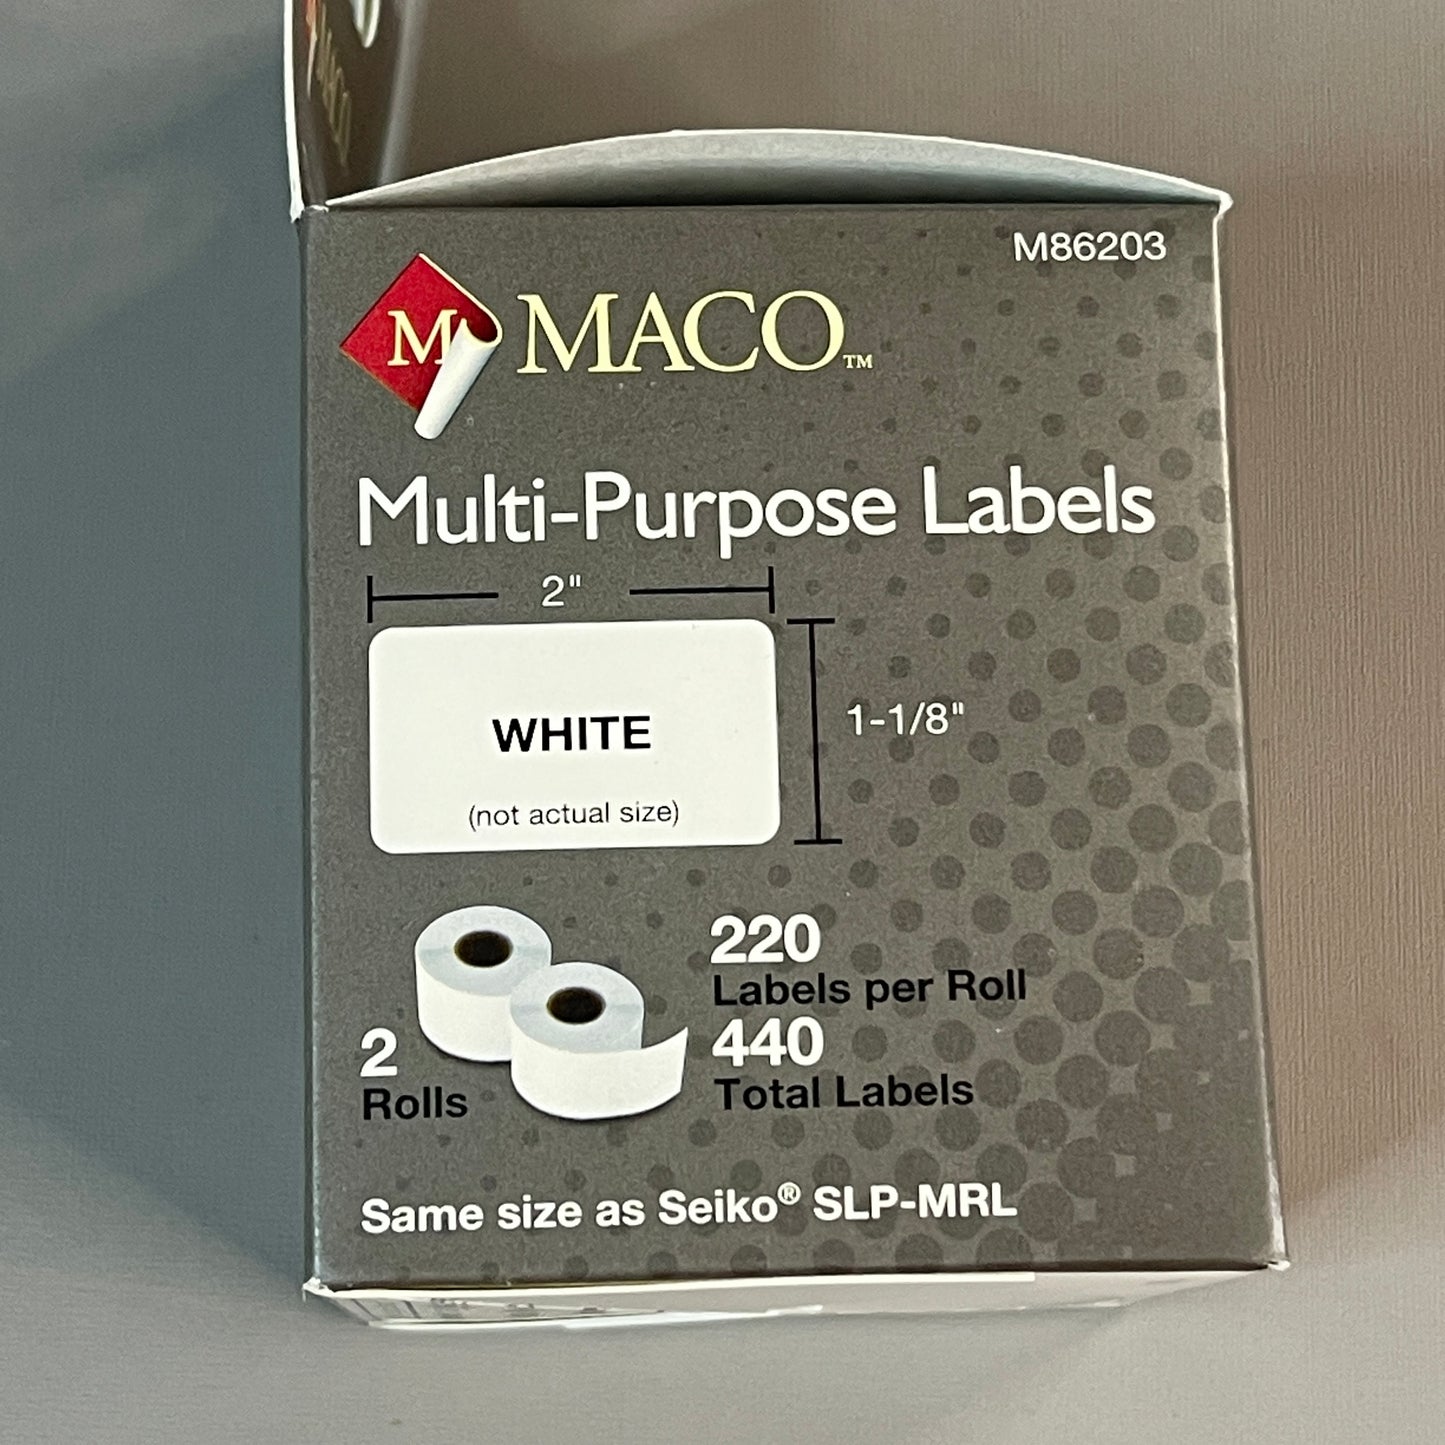 MACO Direct Thermal Printer Labels 1-1/8” x 2" 2 Rolls (440 Total Labels) White M86203